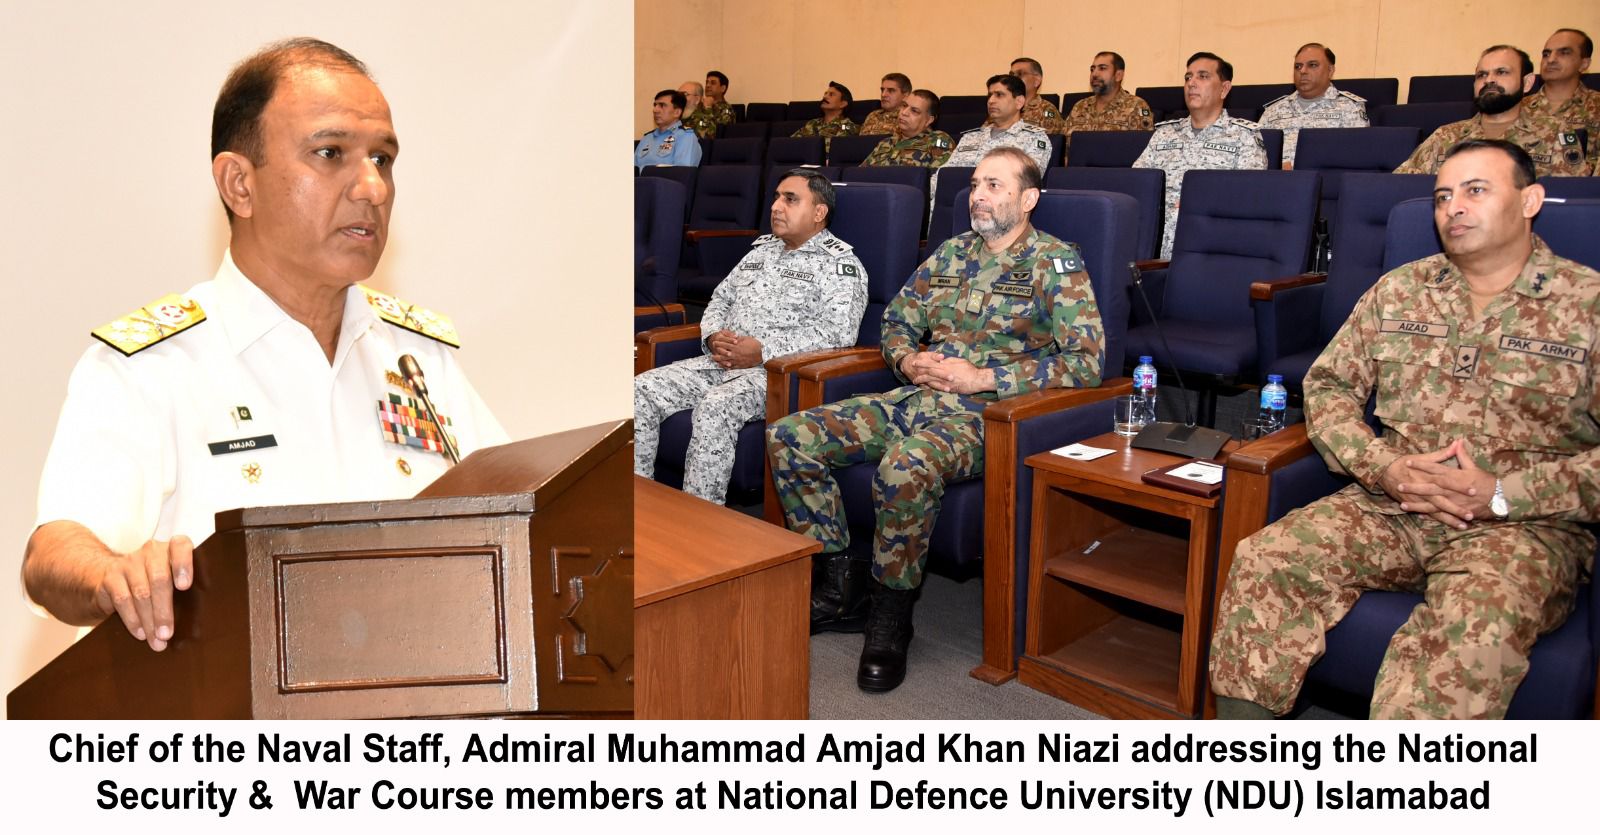 CHIEF OF THE NAVAL STAFF ADDRESSES TO PARTICIPANTS OF NATIONAL SECURITY & WAR COURSE AT NDU